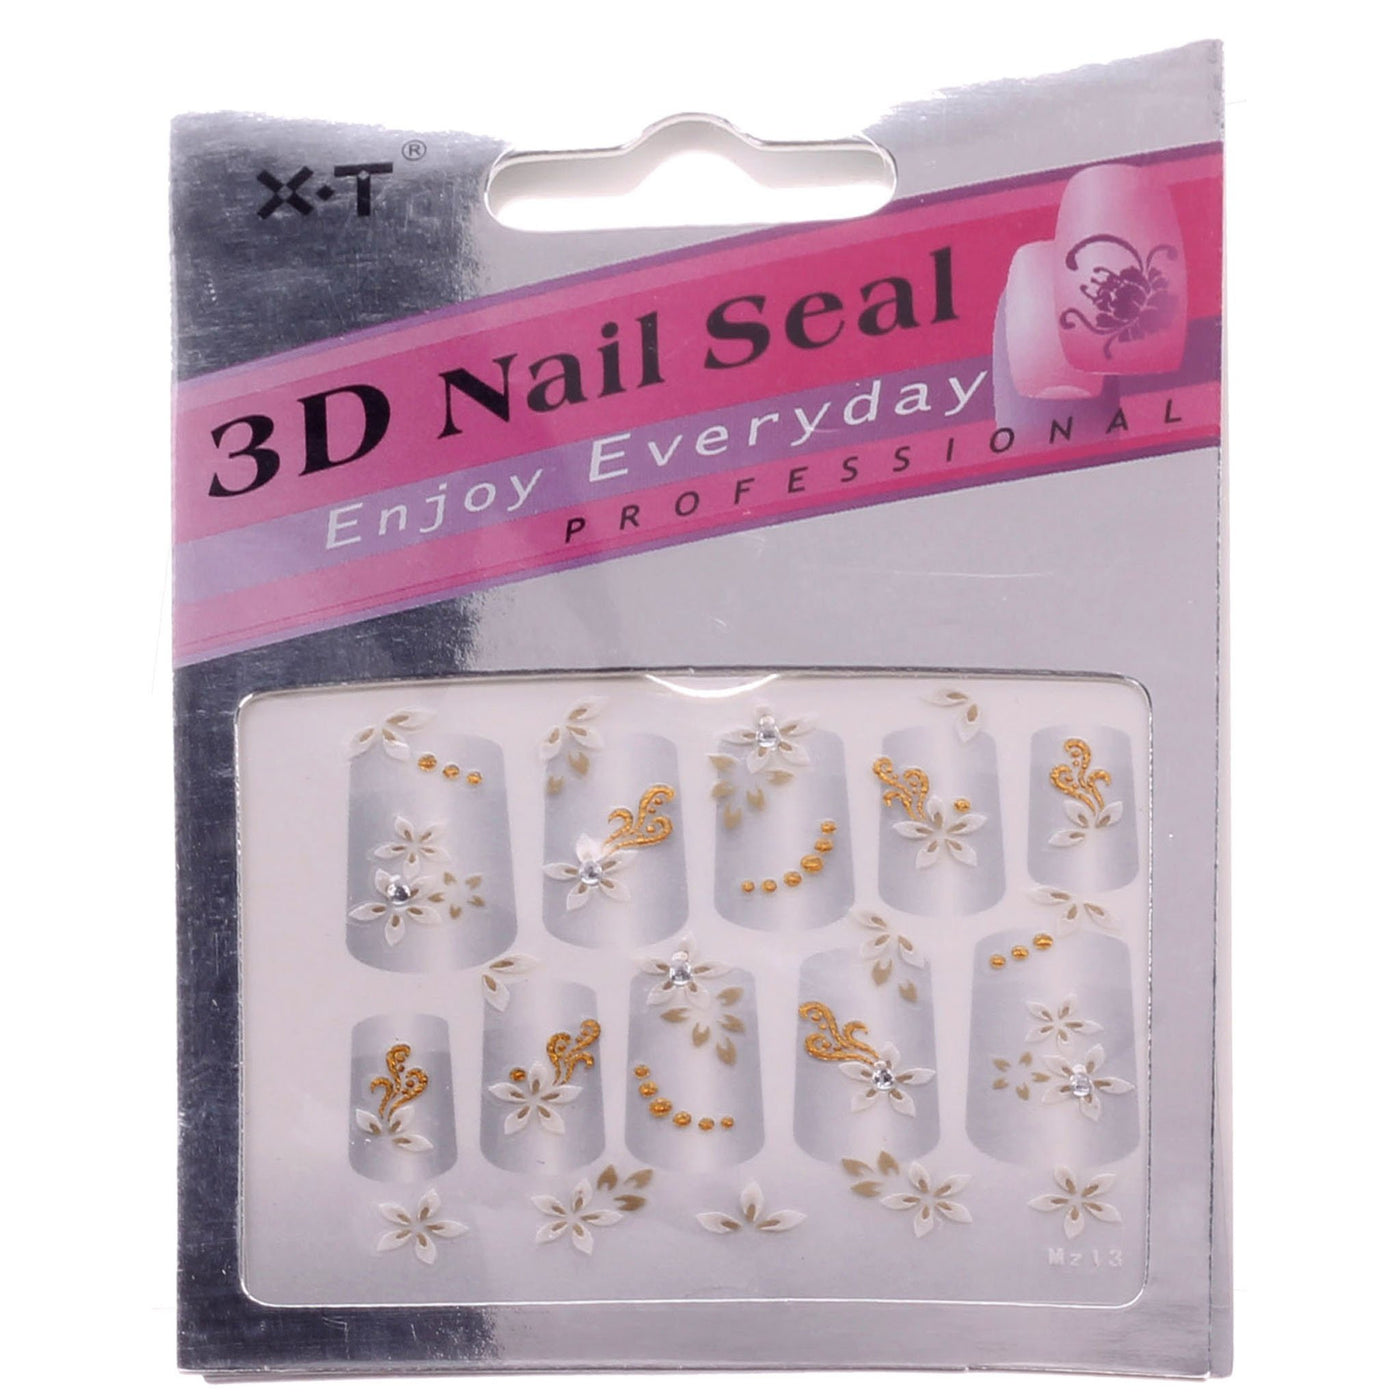 Skin and nail sticker